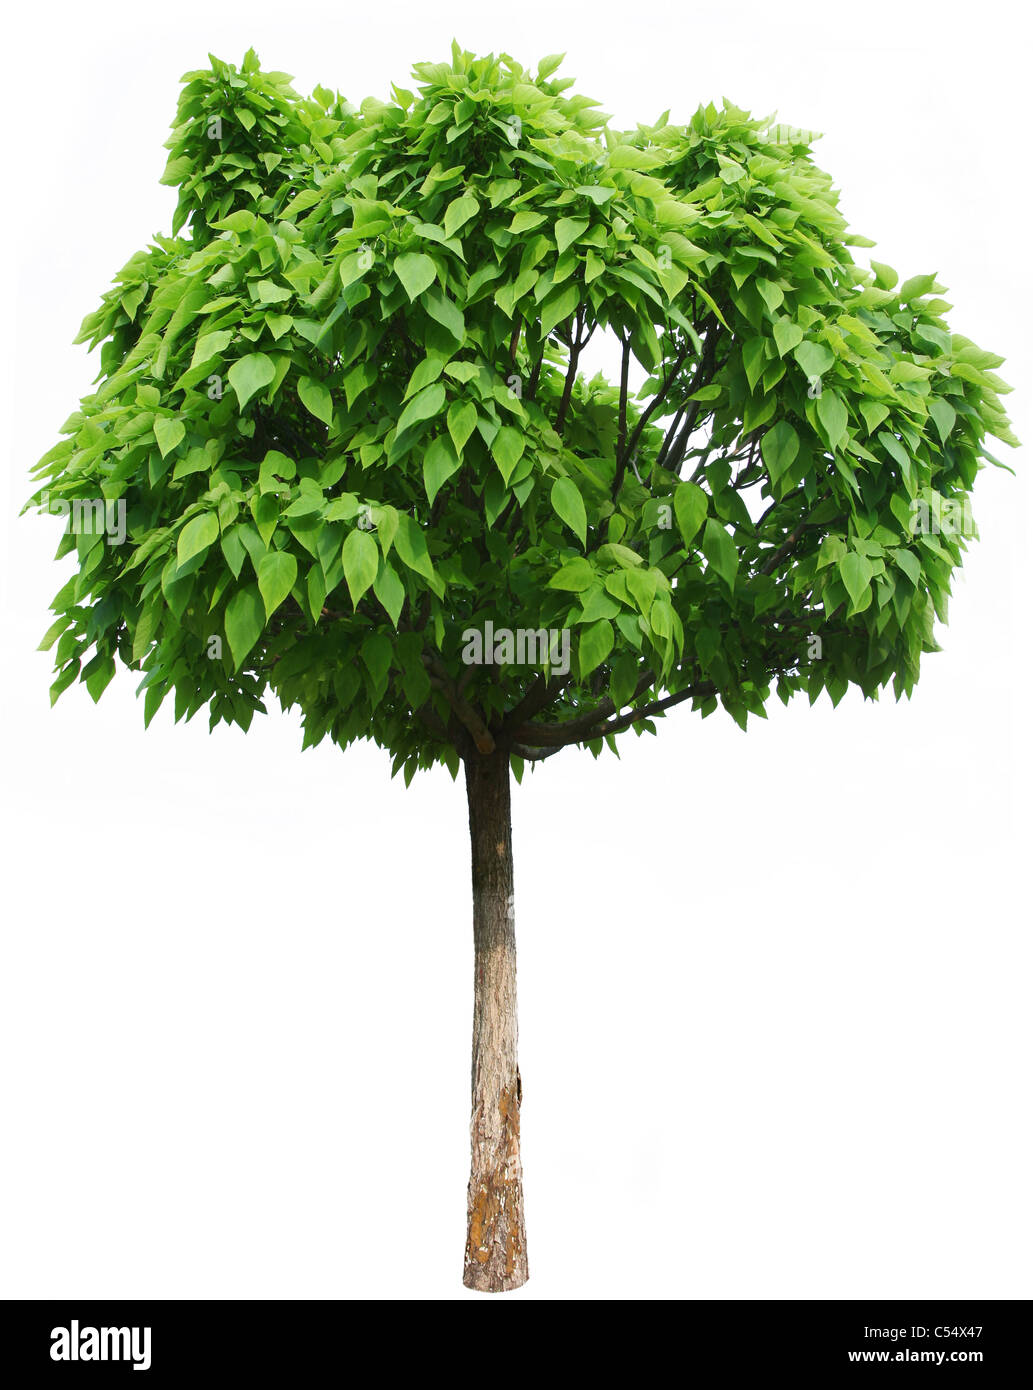 Green tree isolated on a white background. Stock Photo